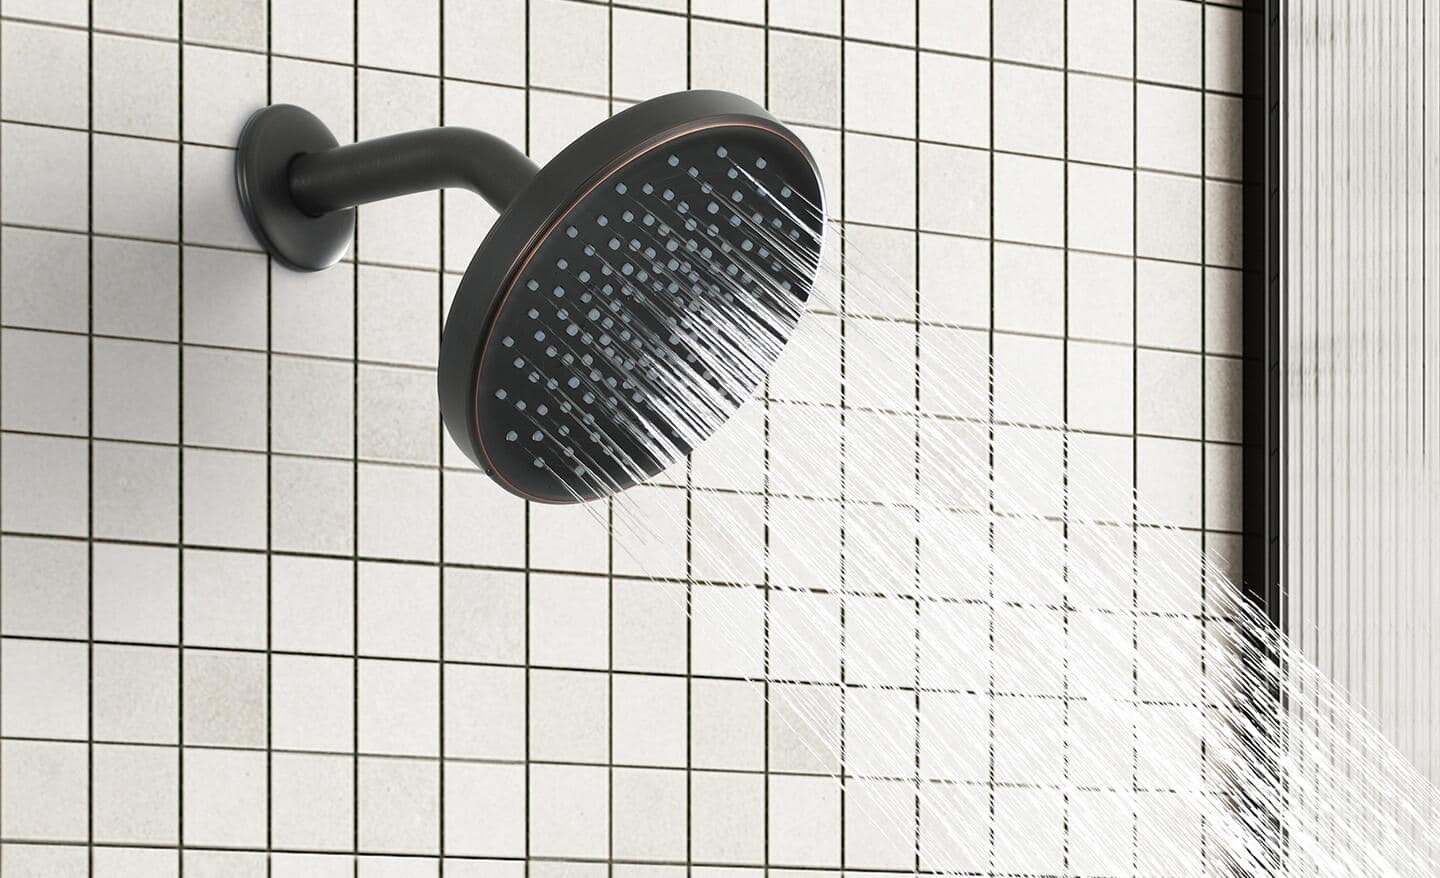 A fixed shower head spraying water into a shower.